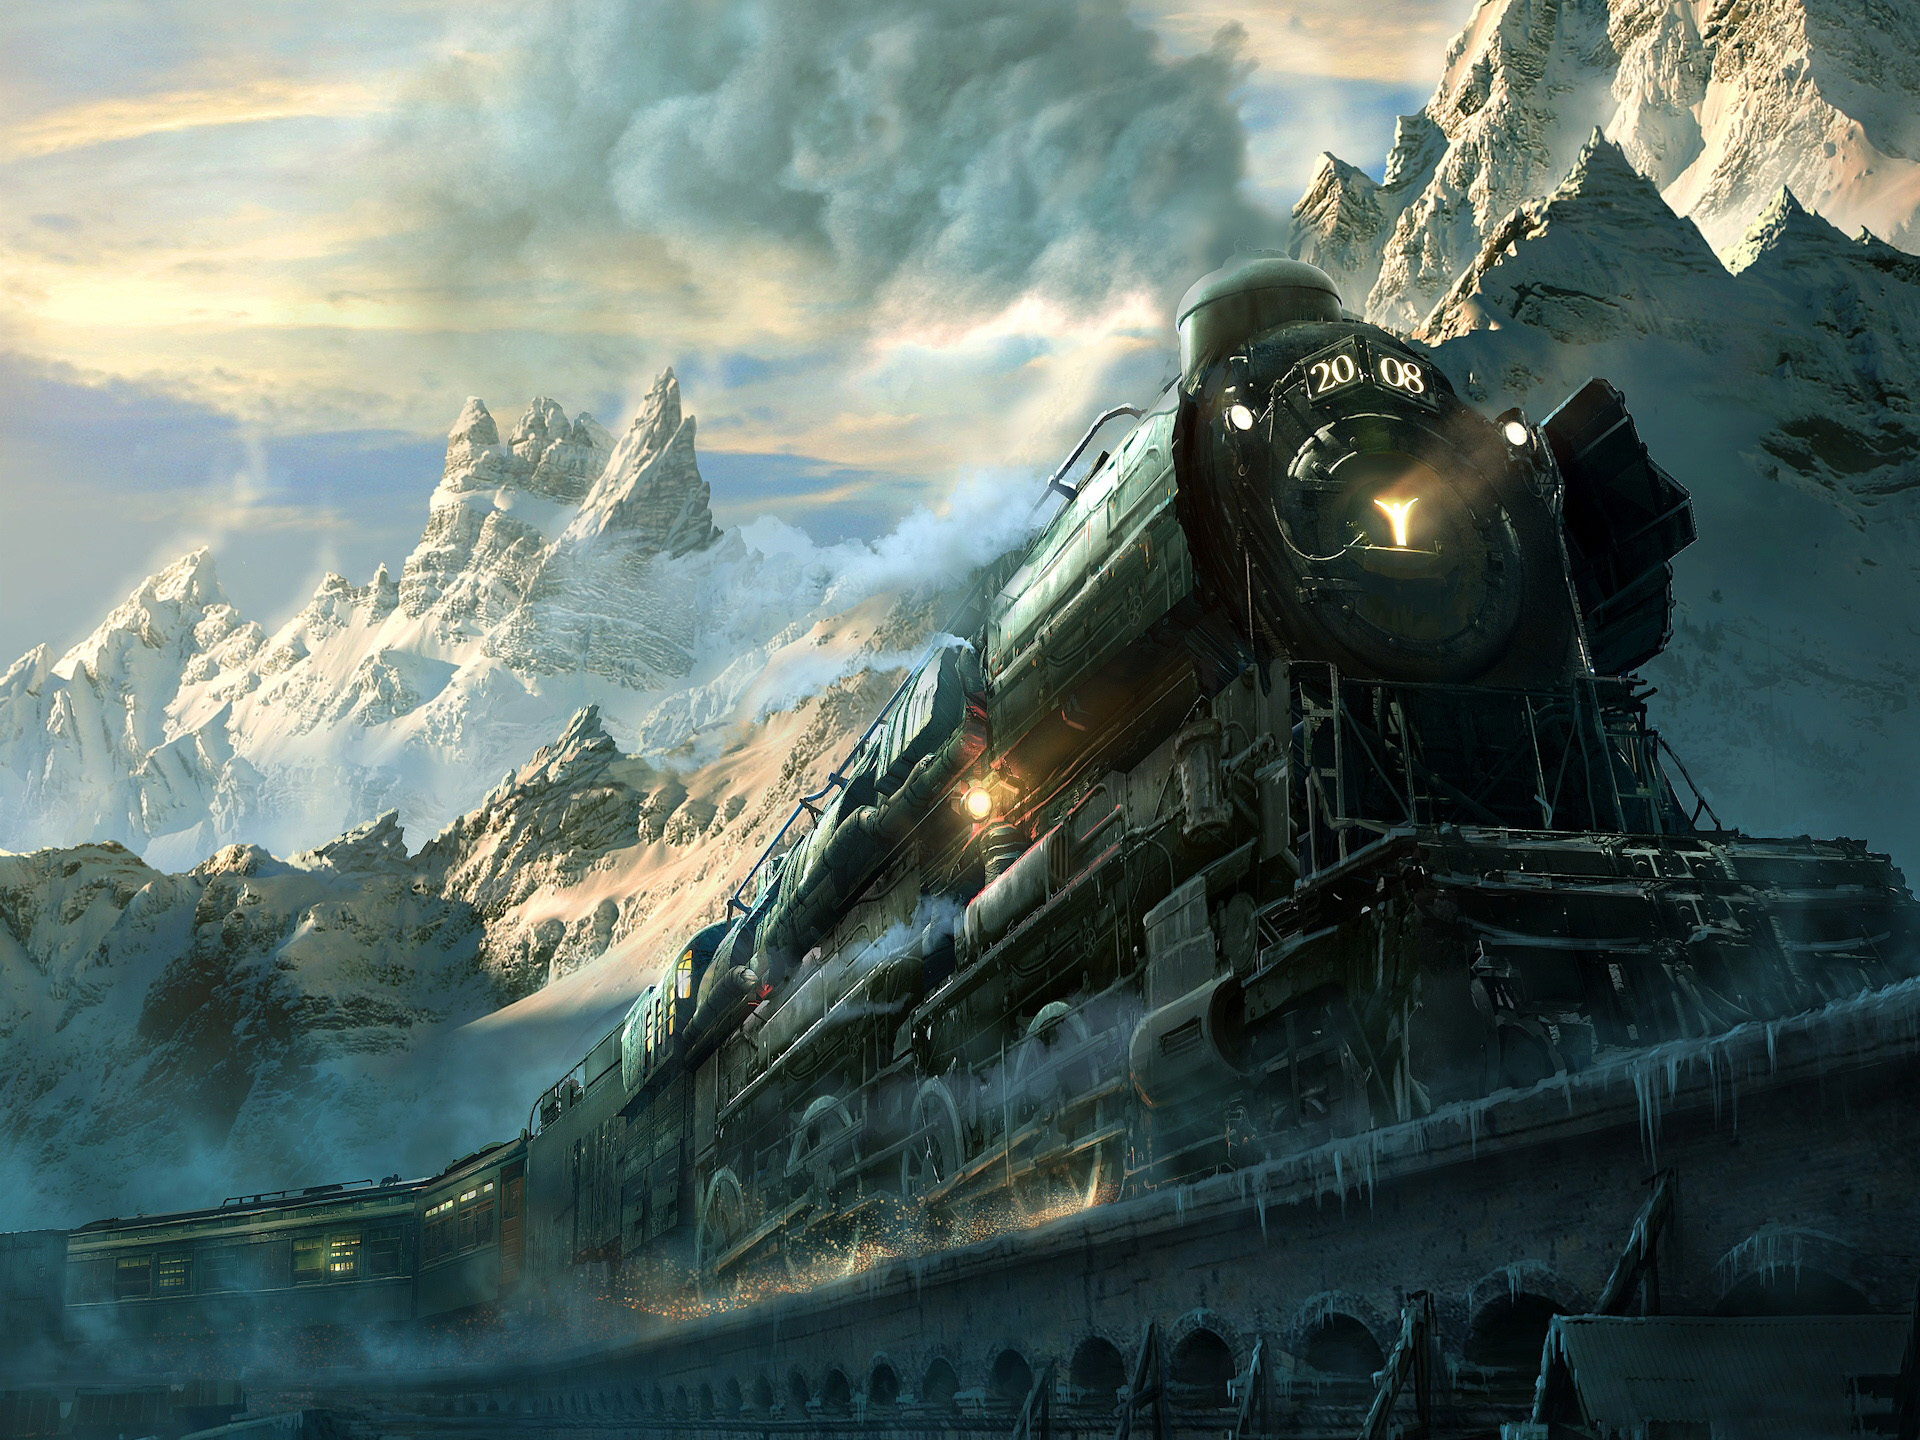 Train Digital Painting Wallpaper World Collection